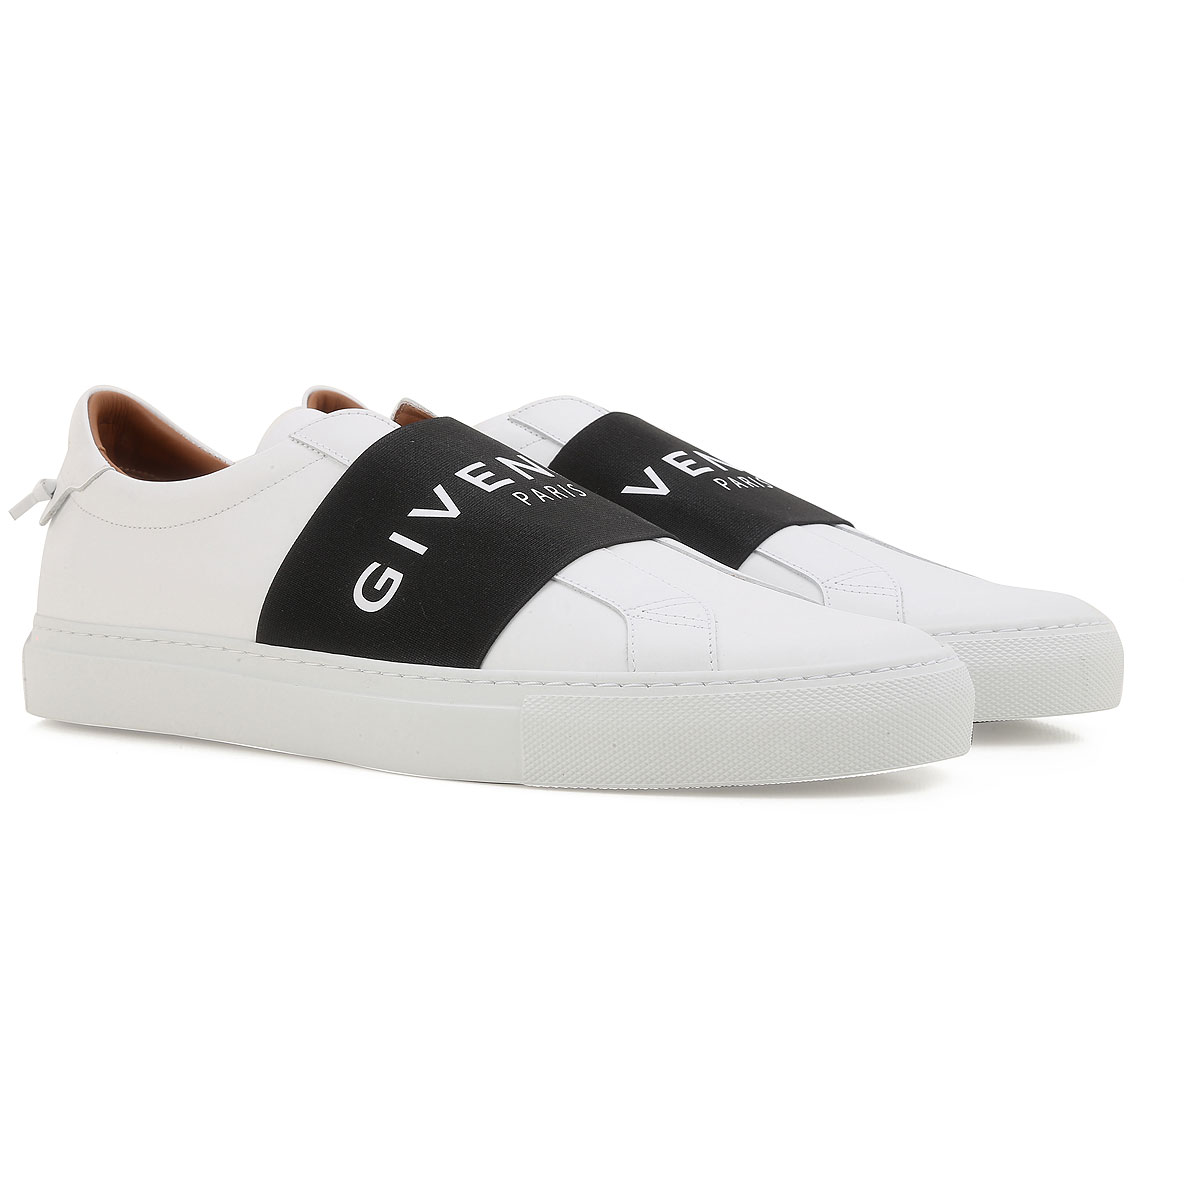 Mens Shoes Givenchy, Style code: bh0003h017-116-